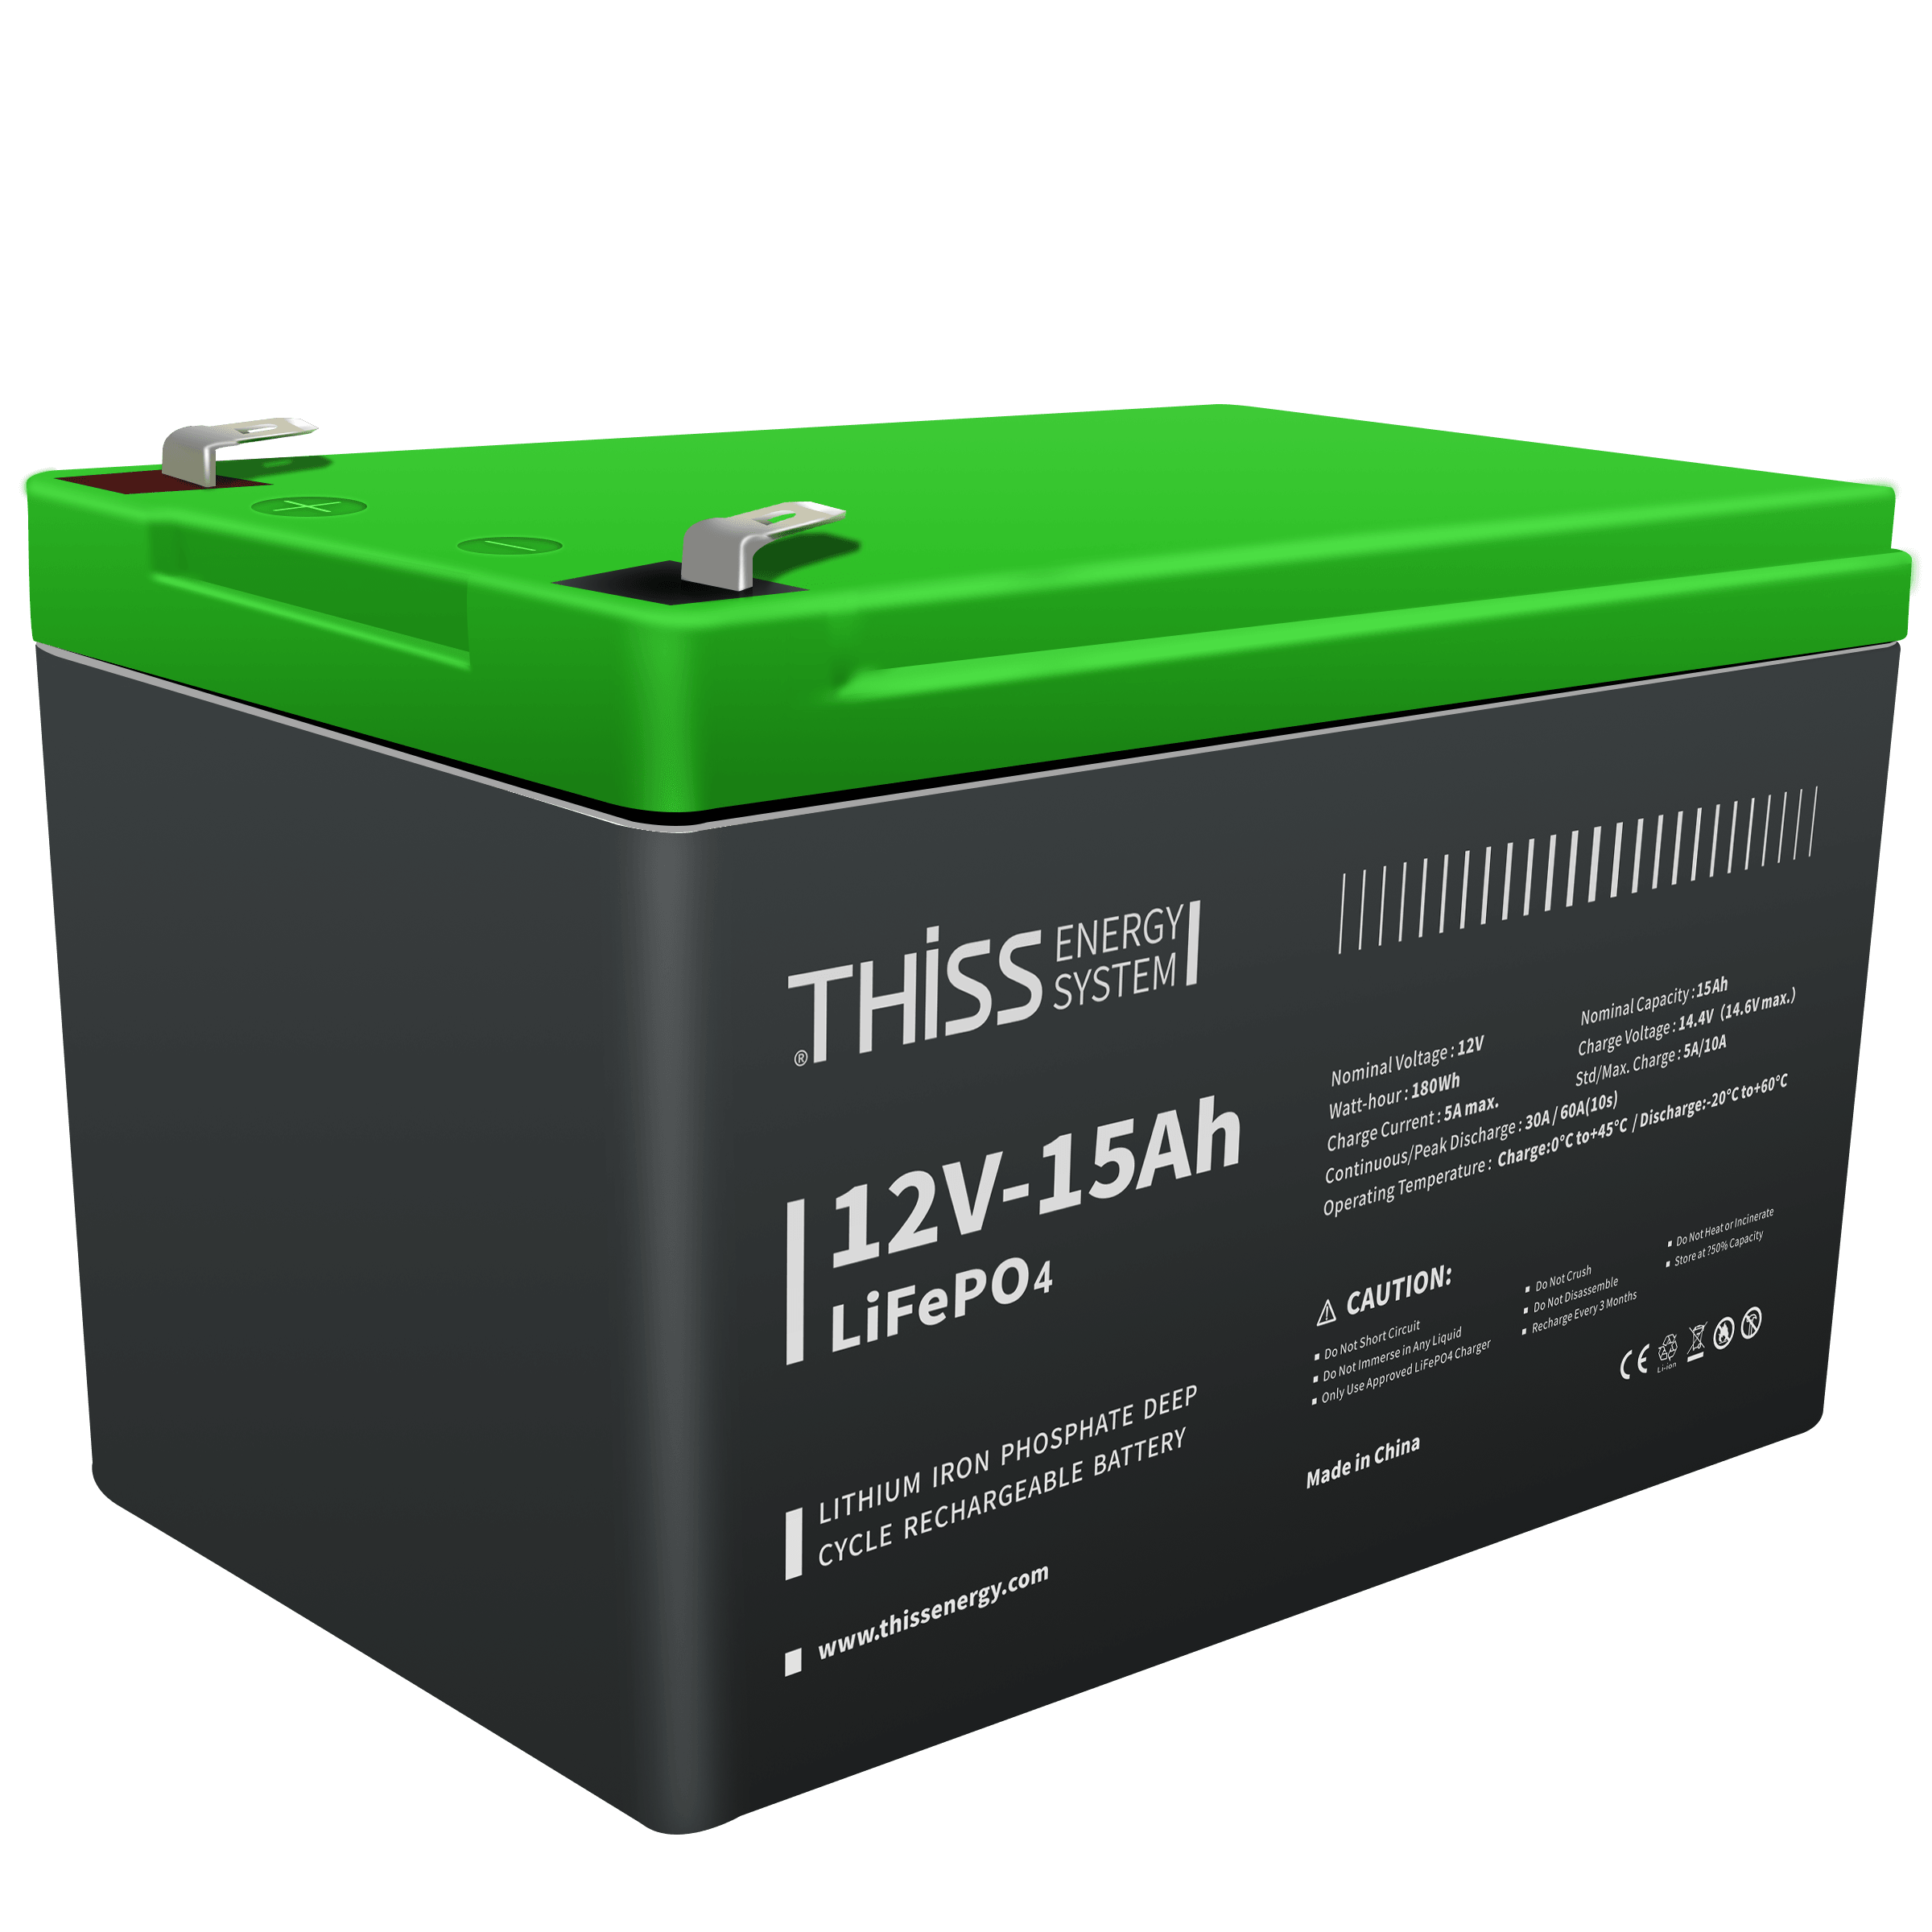 12V 15Ah LiFePO4 Battery, Built-in BMS, 4000+ Deep Cycle Rechargeable Battery, Maintenance Free Home Energy Storage And Off Grid Application Battery